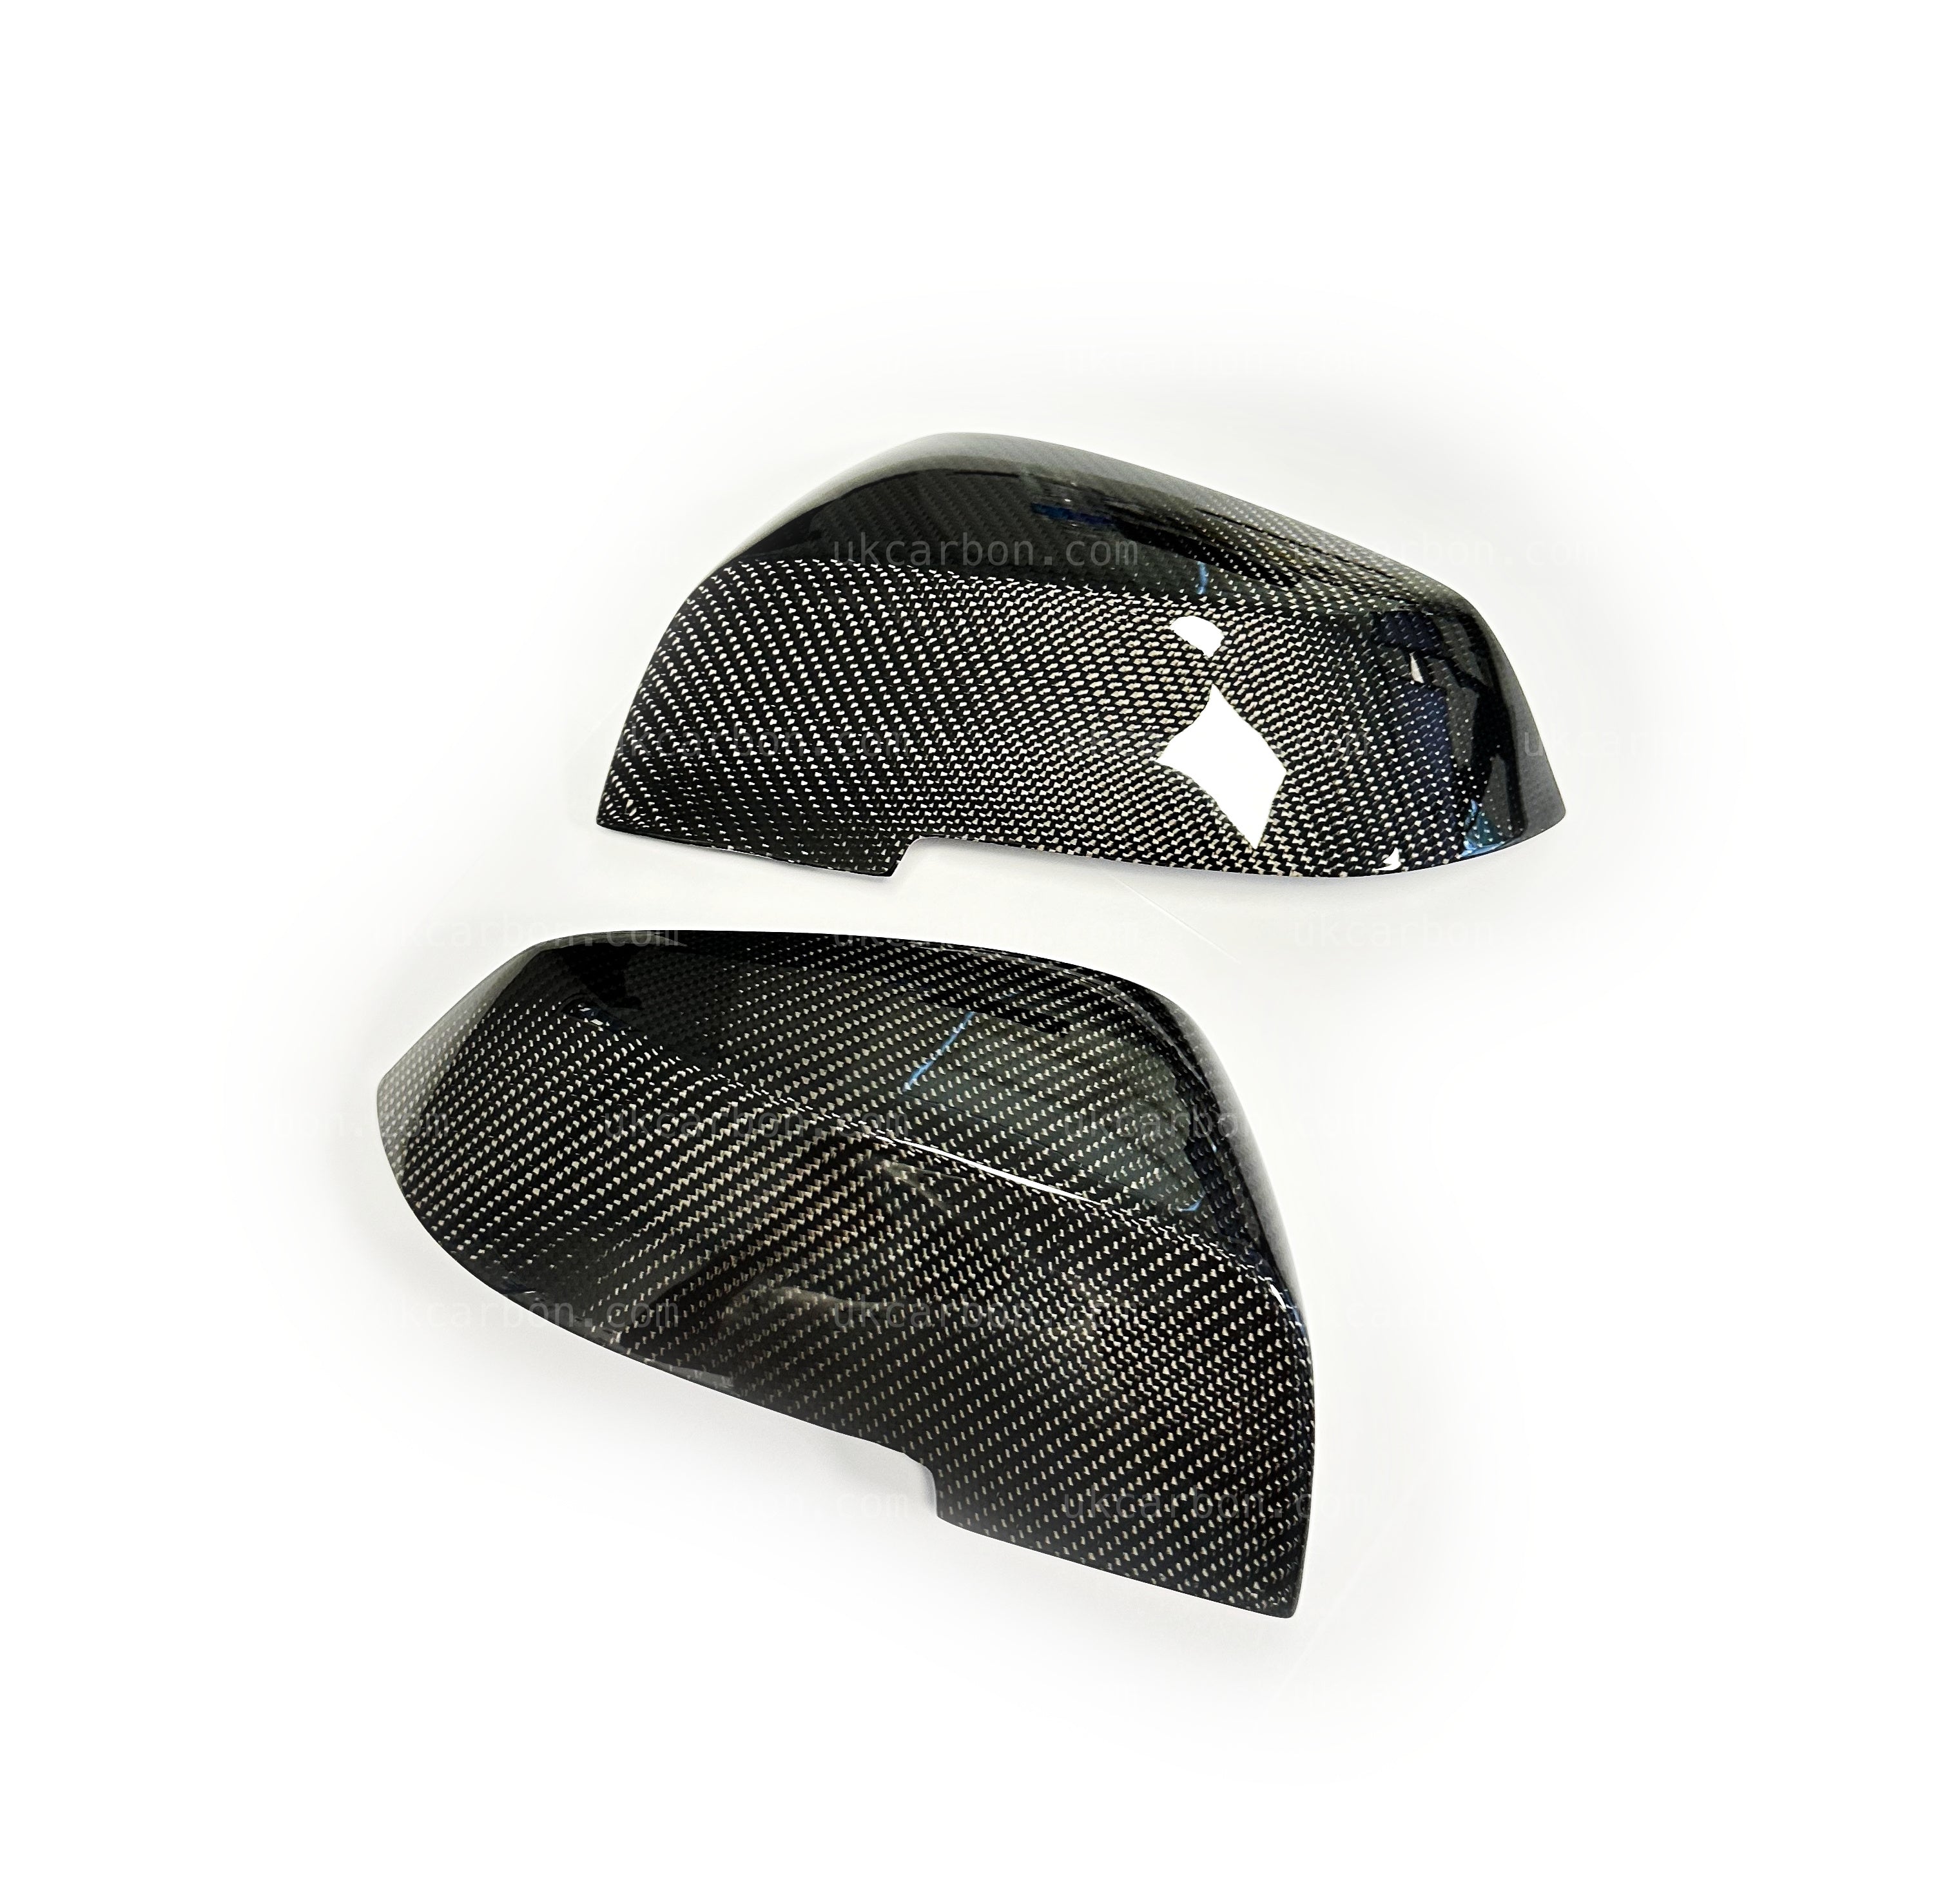 BMW 2 Series Carbon M Performance Wing Mirror Cover Replacements F22 by UKCarbon